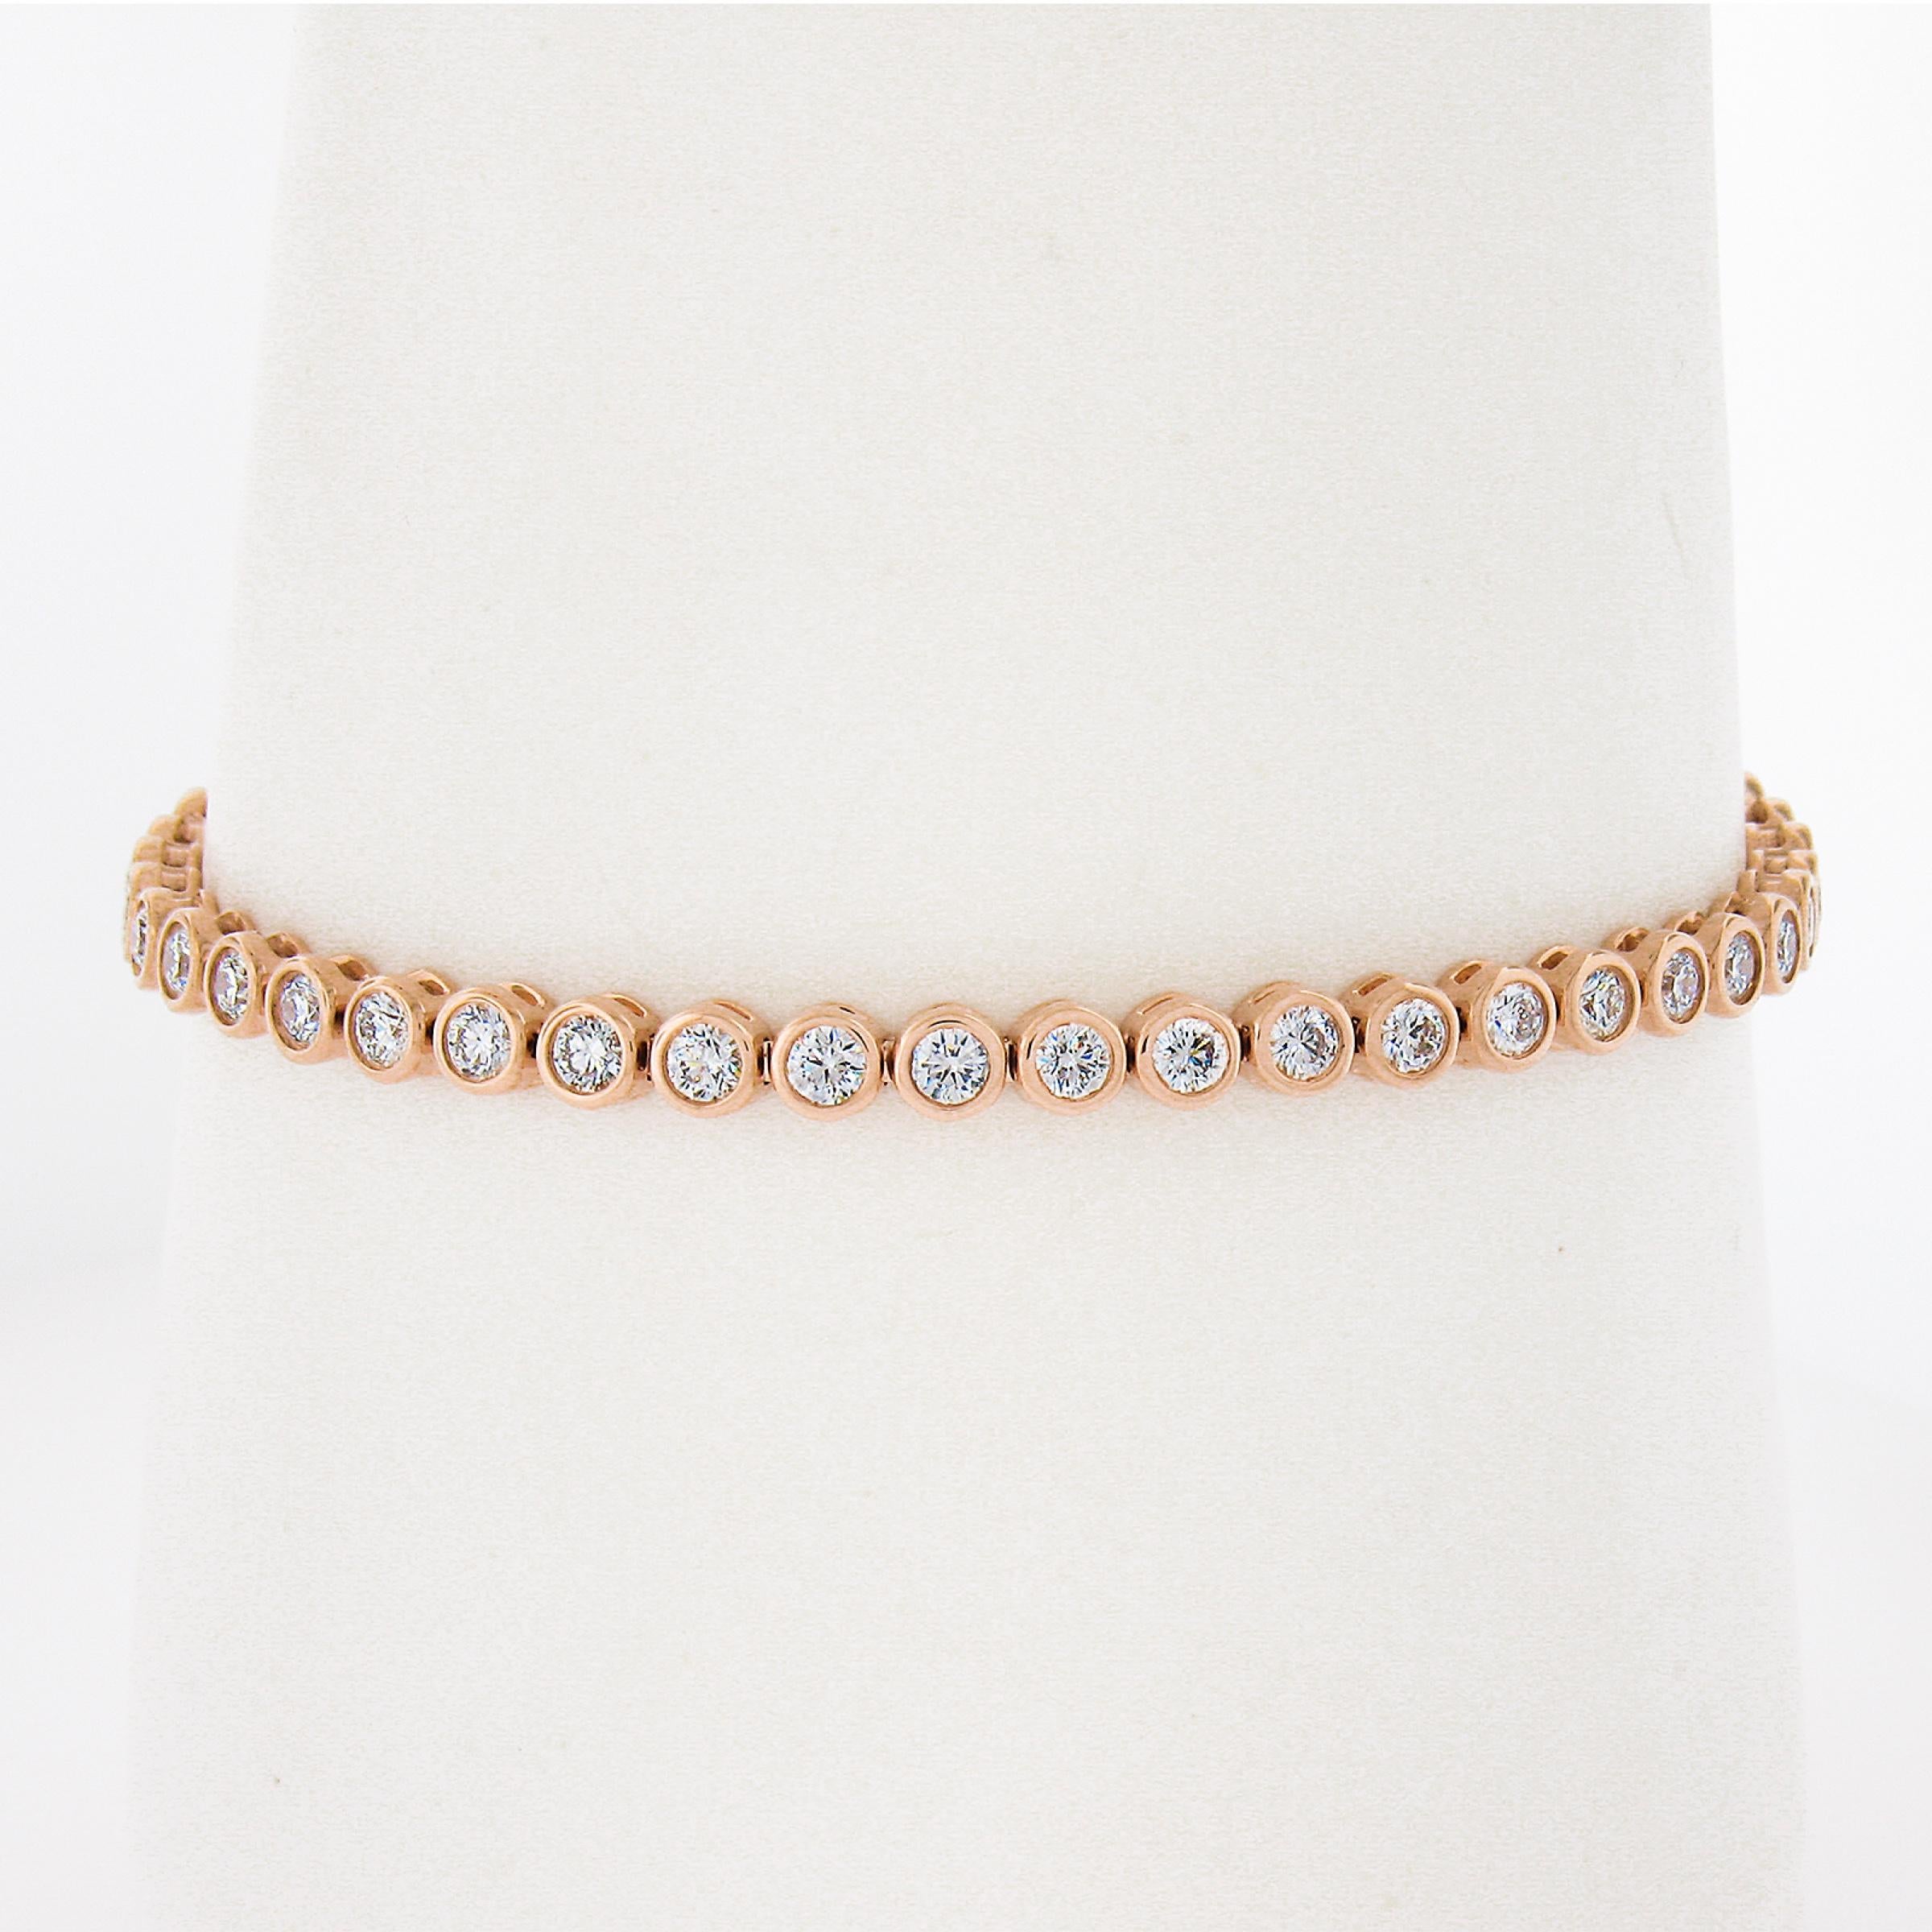 --Stone(s):--
(45) Natural Genuine Diamonds - Round Brilliant Cut - Bezel Set - G/H Color - VS1/VS2 Clarity 
Total Carat Weight:	2.91 (exact)

Material: Solid 14K Rose Gold
Weight: 10.26 Grams
Length: Will comfortably fit up to a 7 inch wrist